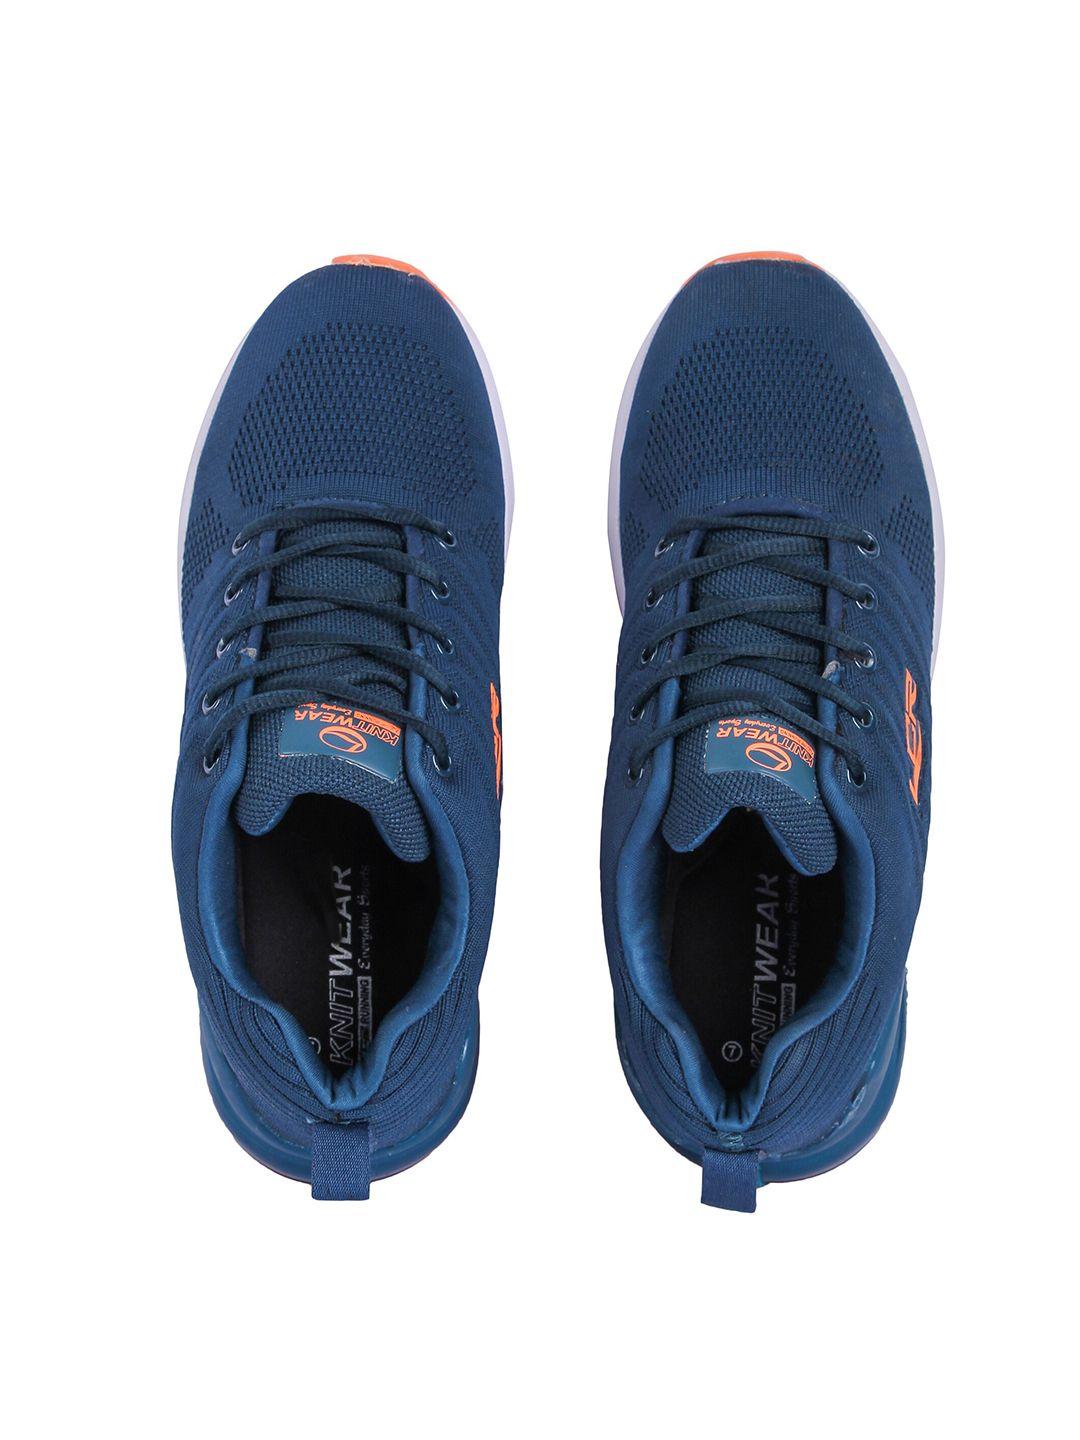 lancer-men-teal-textile-running-lace-ups-non-marking-sports-shoes